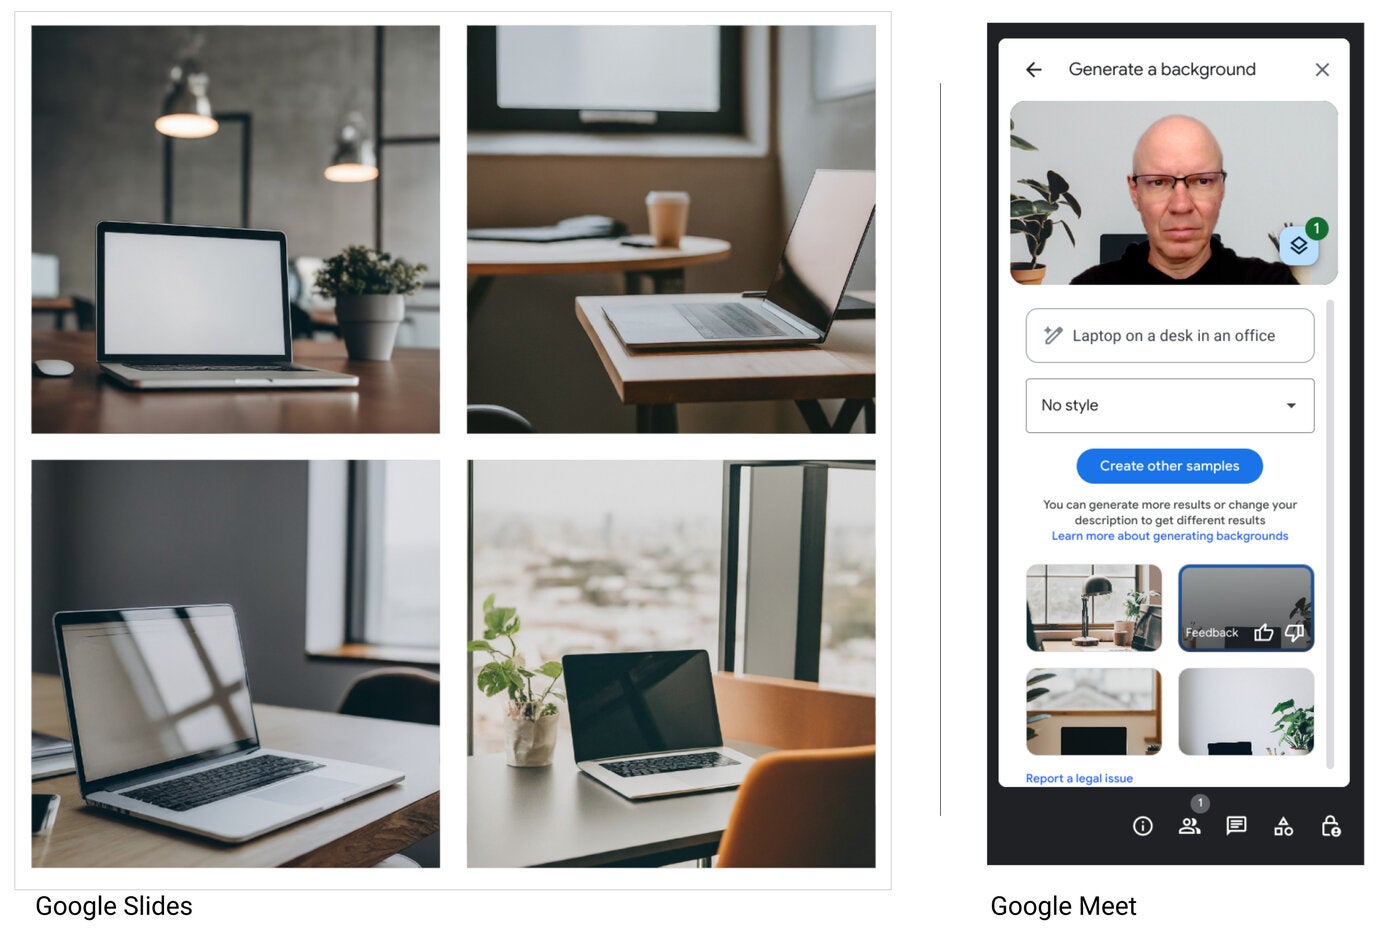 Gemini-generated laptop images in Google Slides (left) and Google Meet (right)